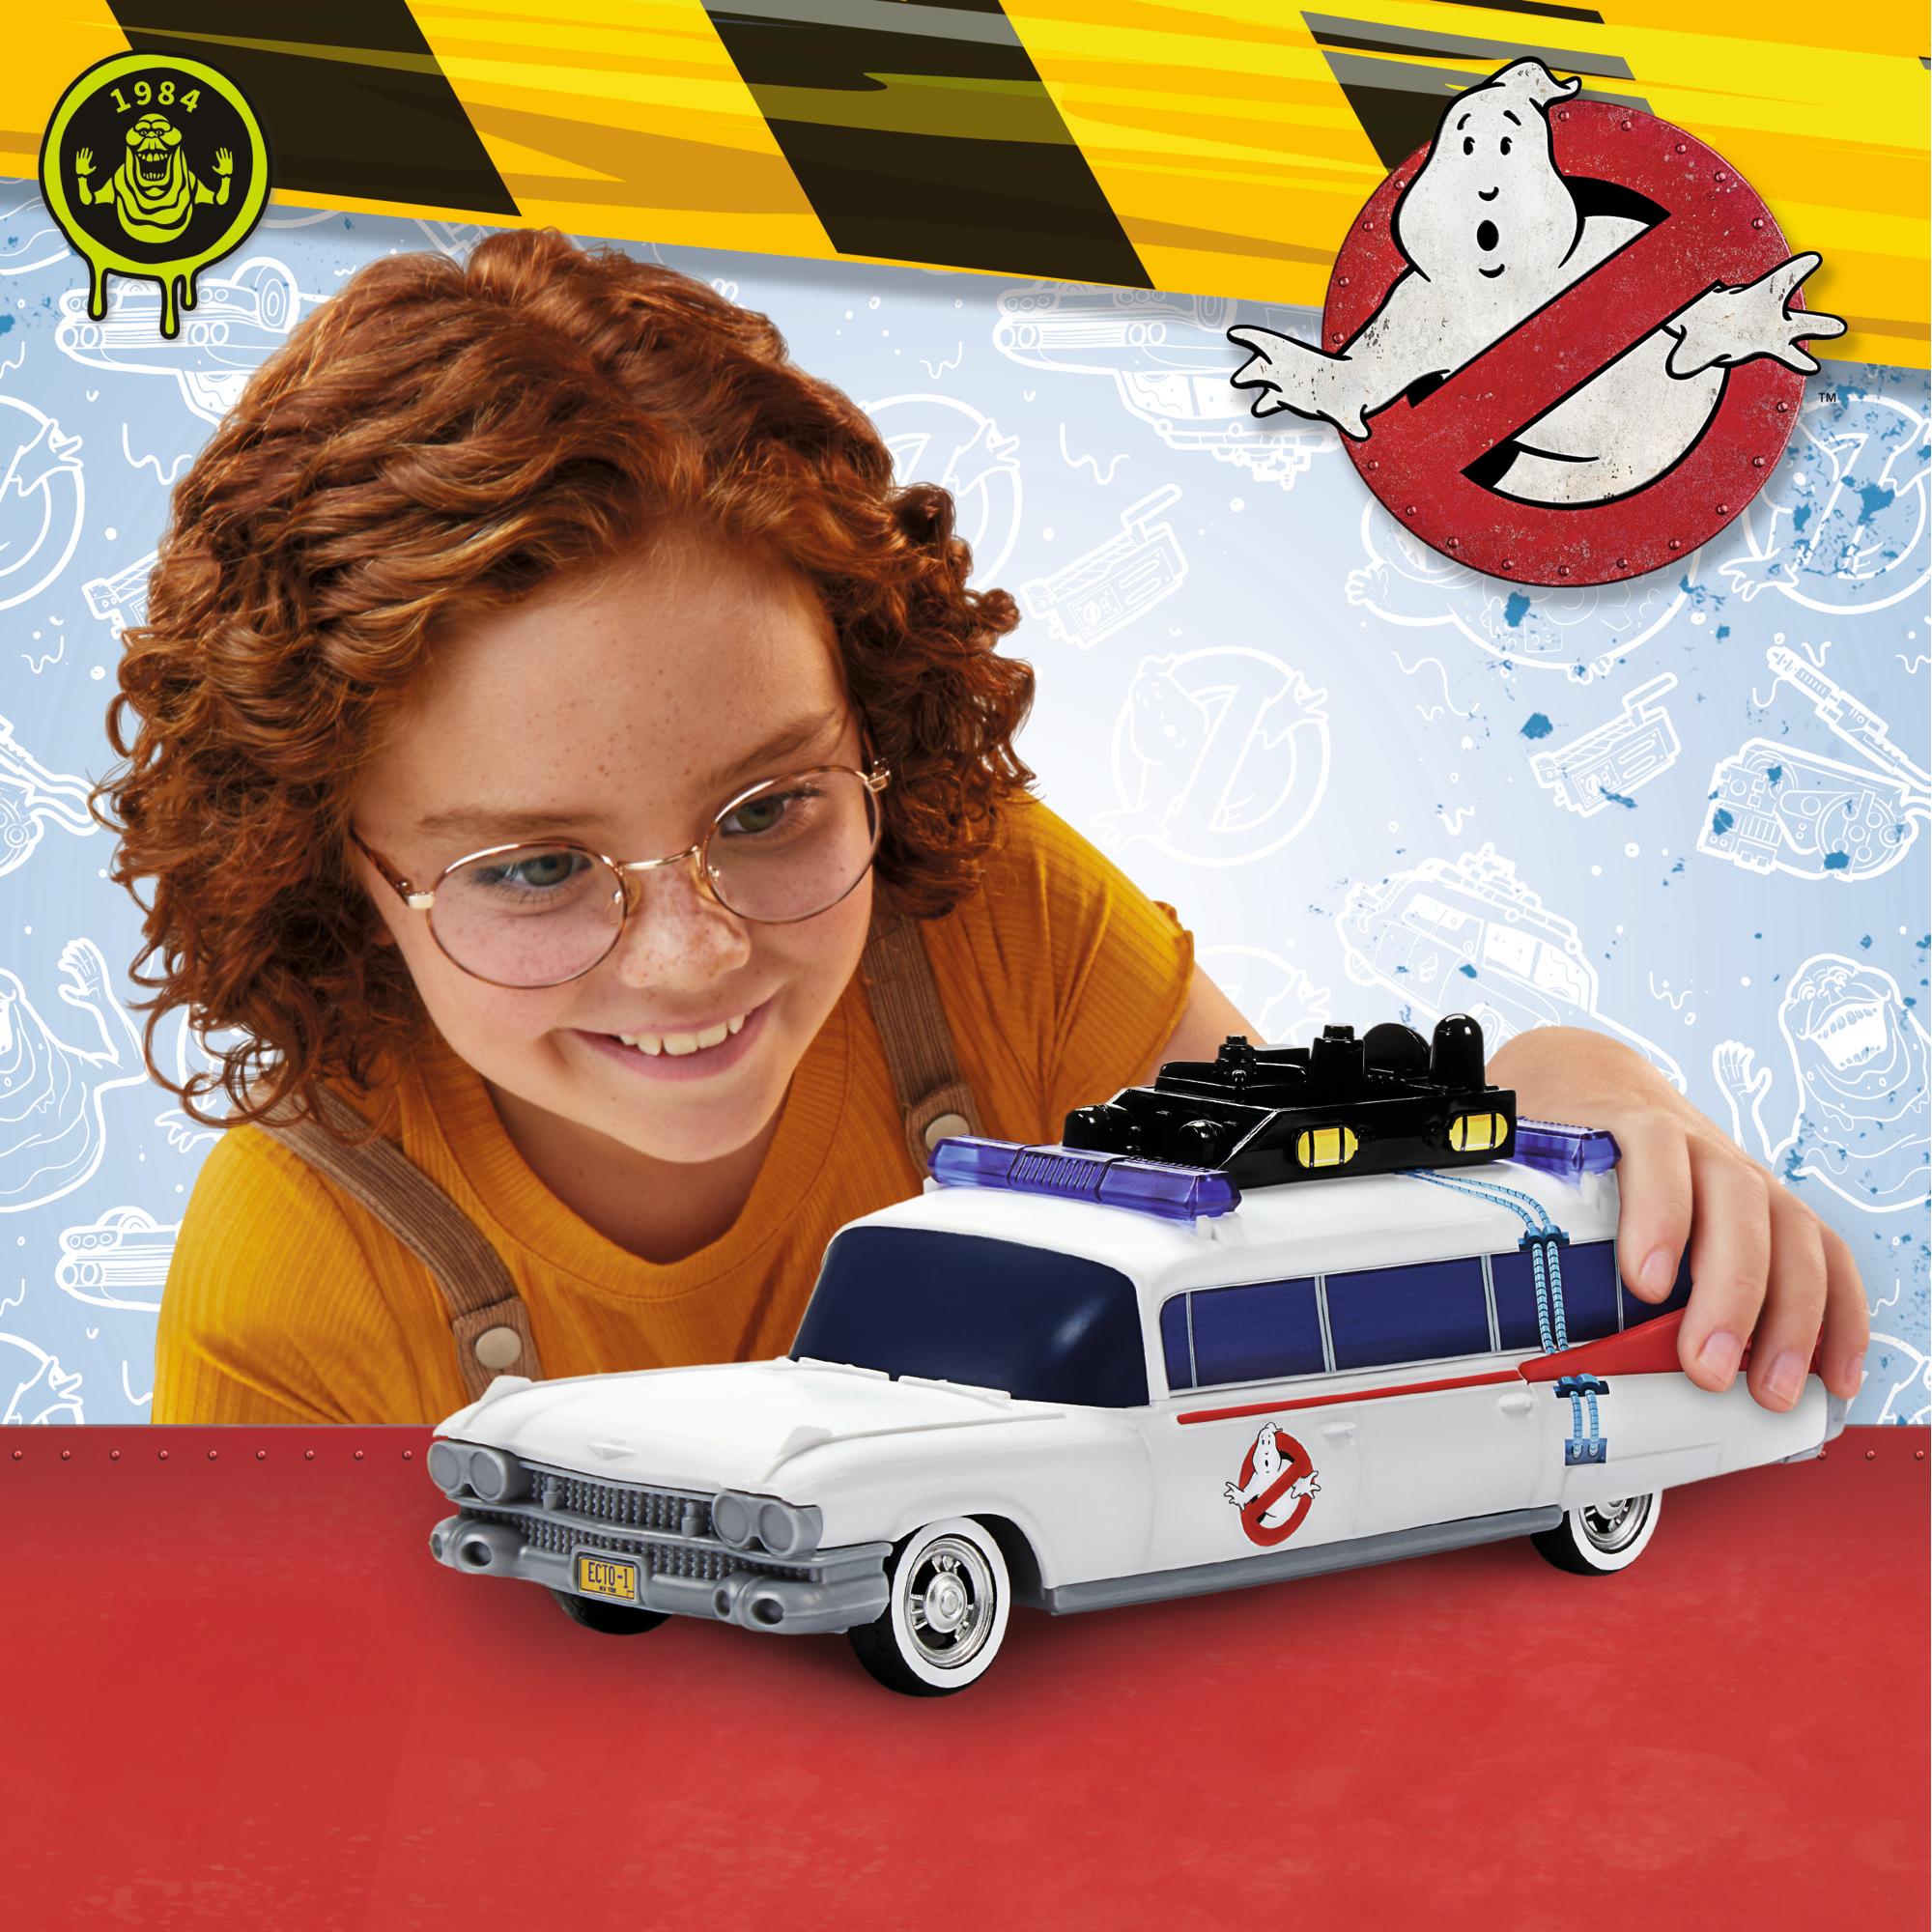 Ghostbusters Movie Ecto-1 Vehicle Toy for Kids Ages 4 and Up Classic ... Ghostbusters Toy